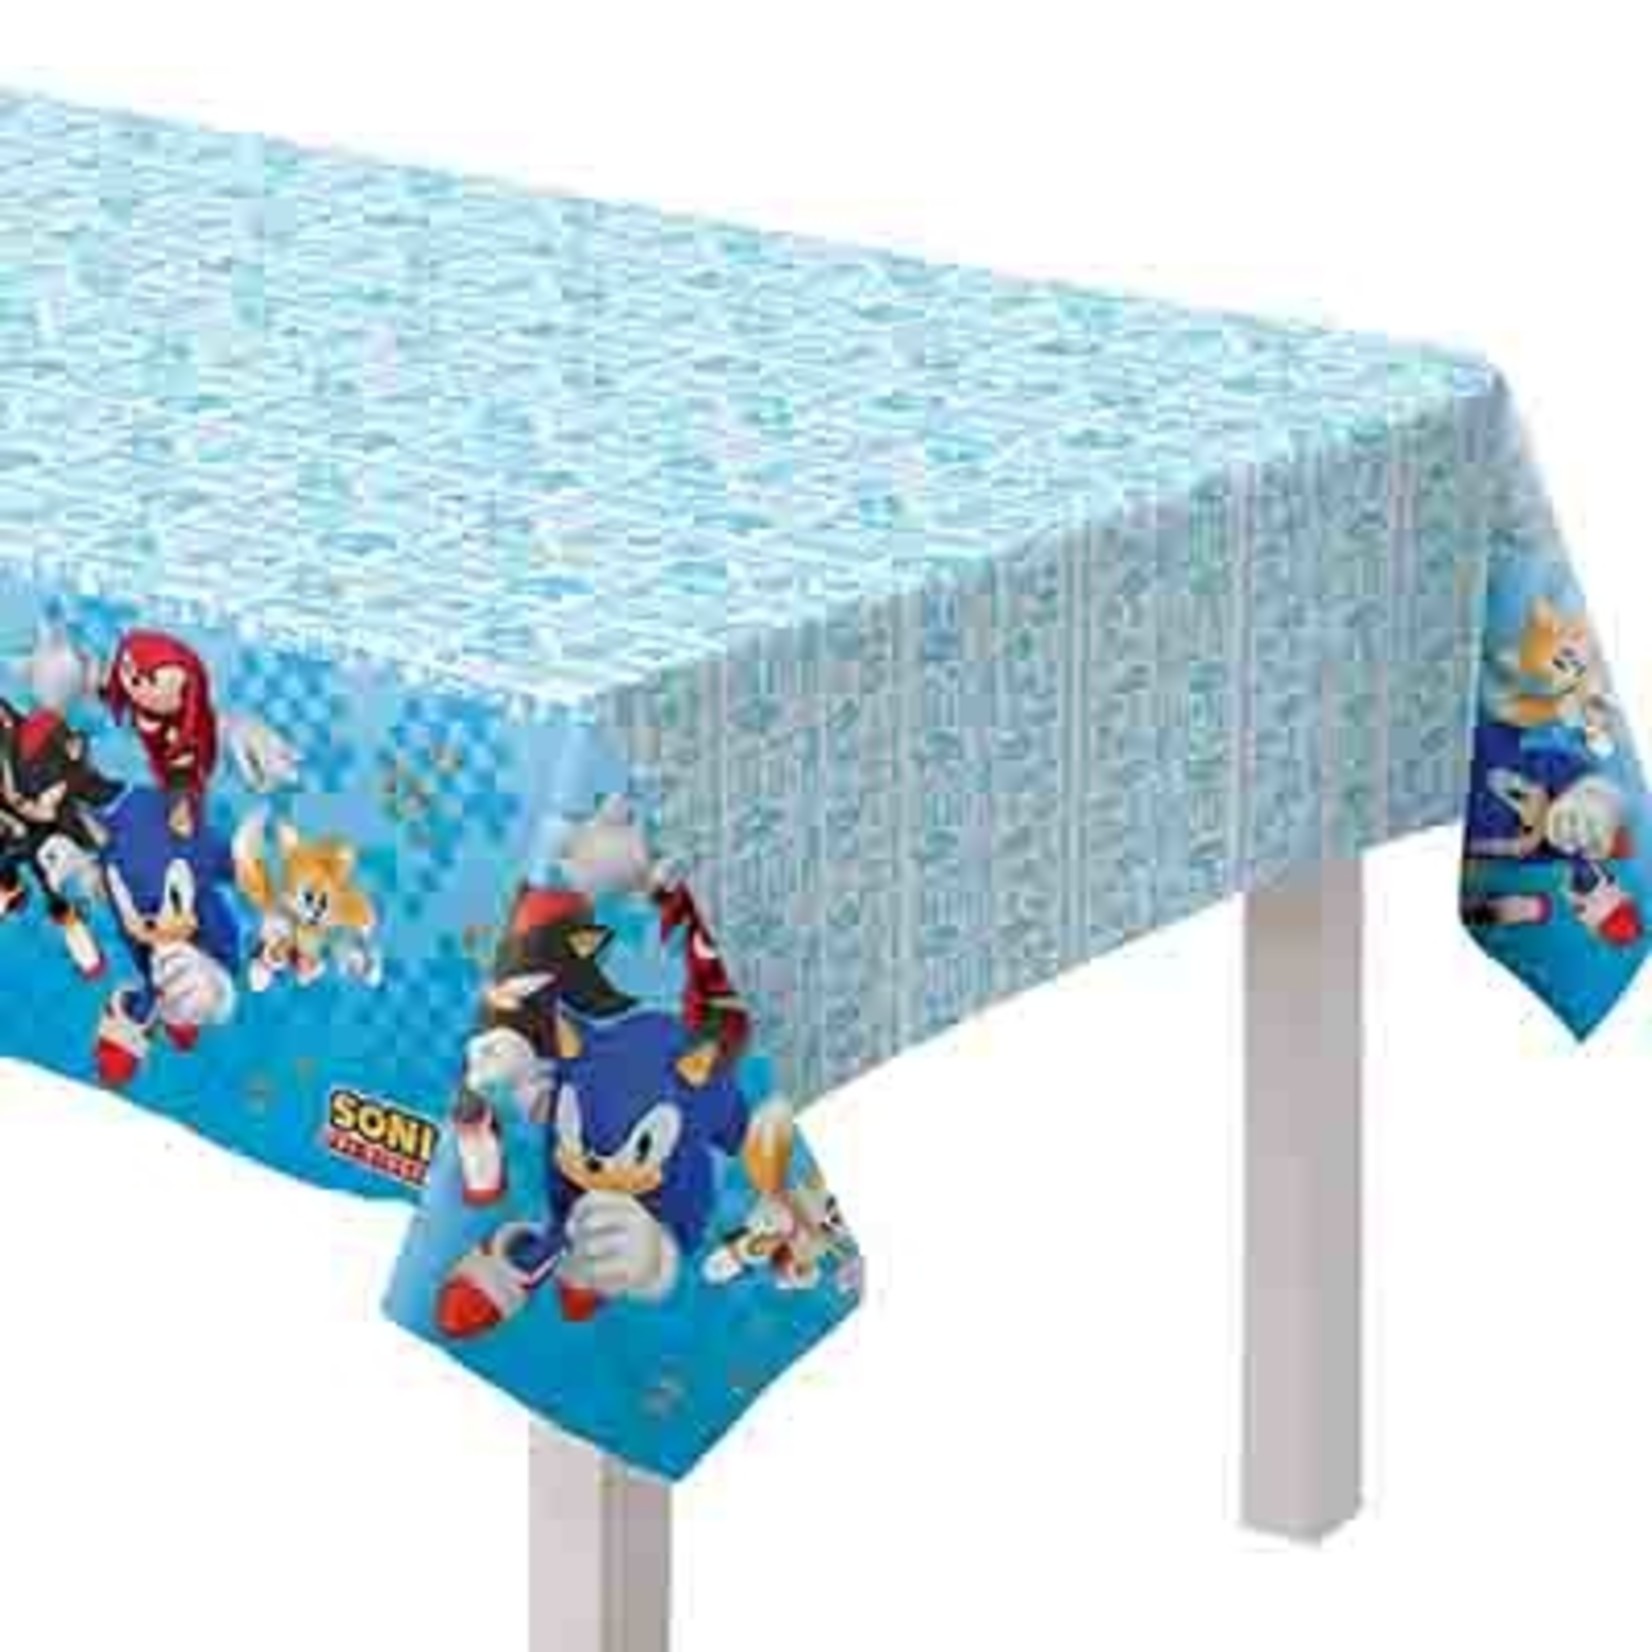 Amscan Sonic The Hedgehog Plastic Table Cover - 54" x 96"